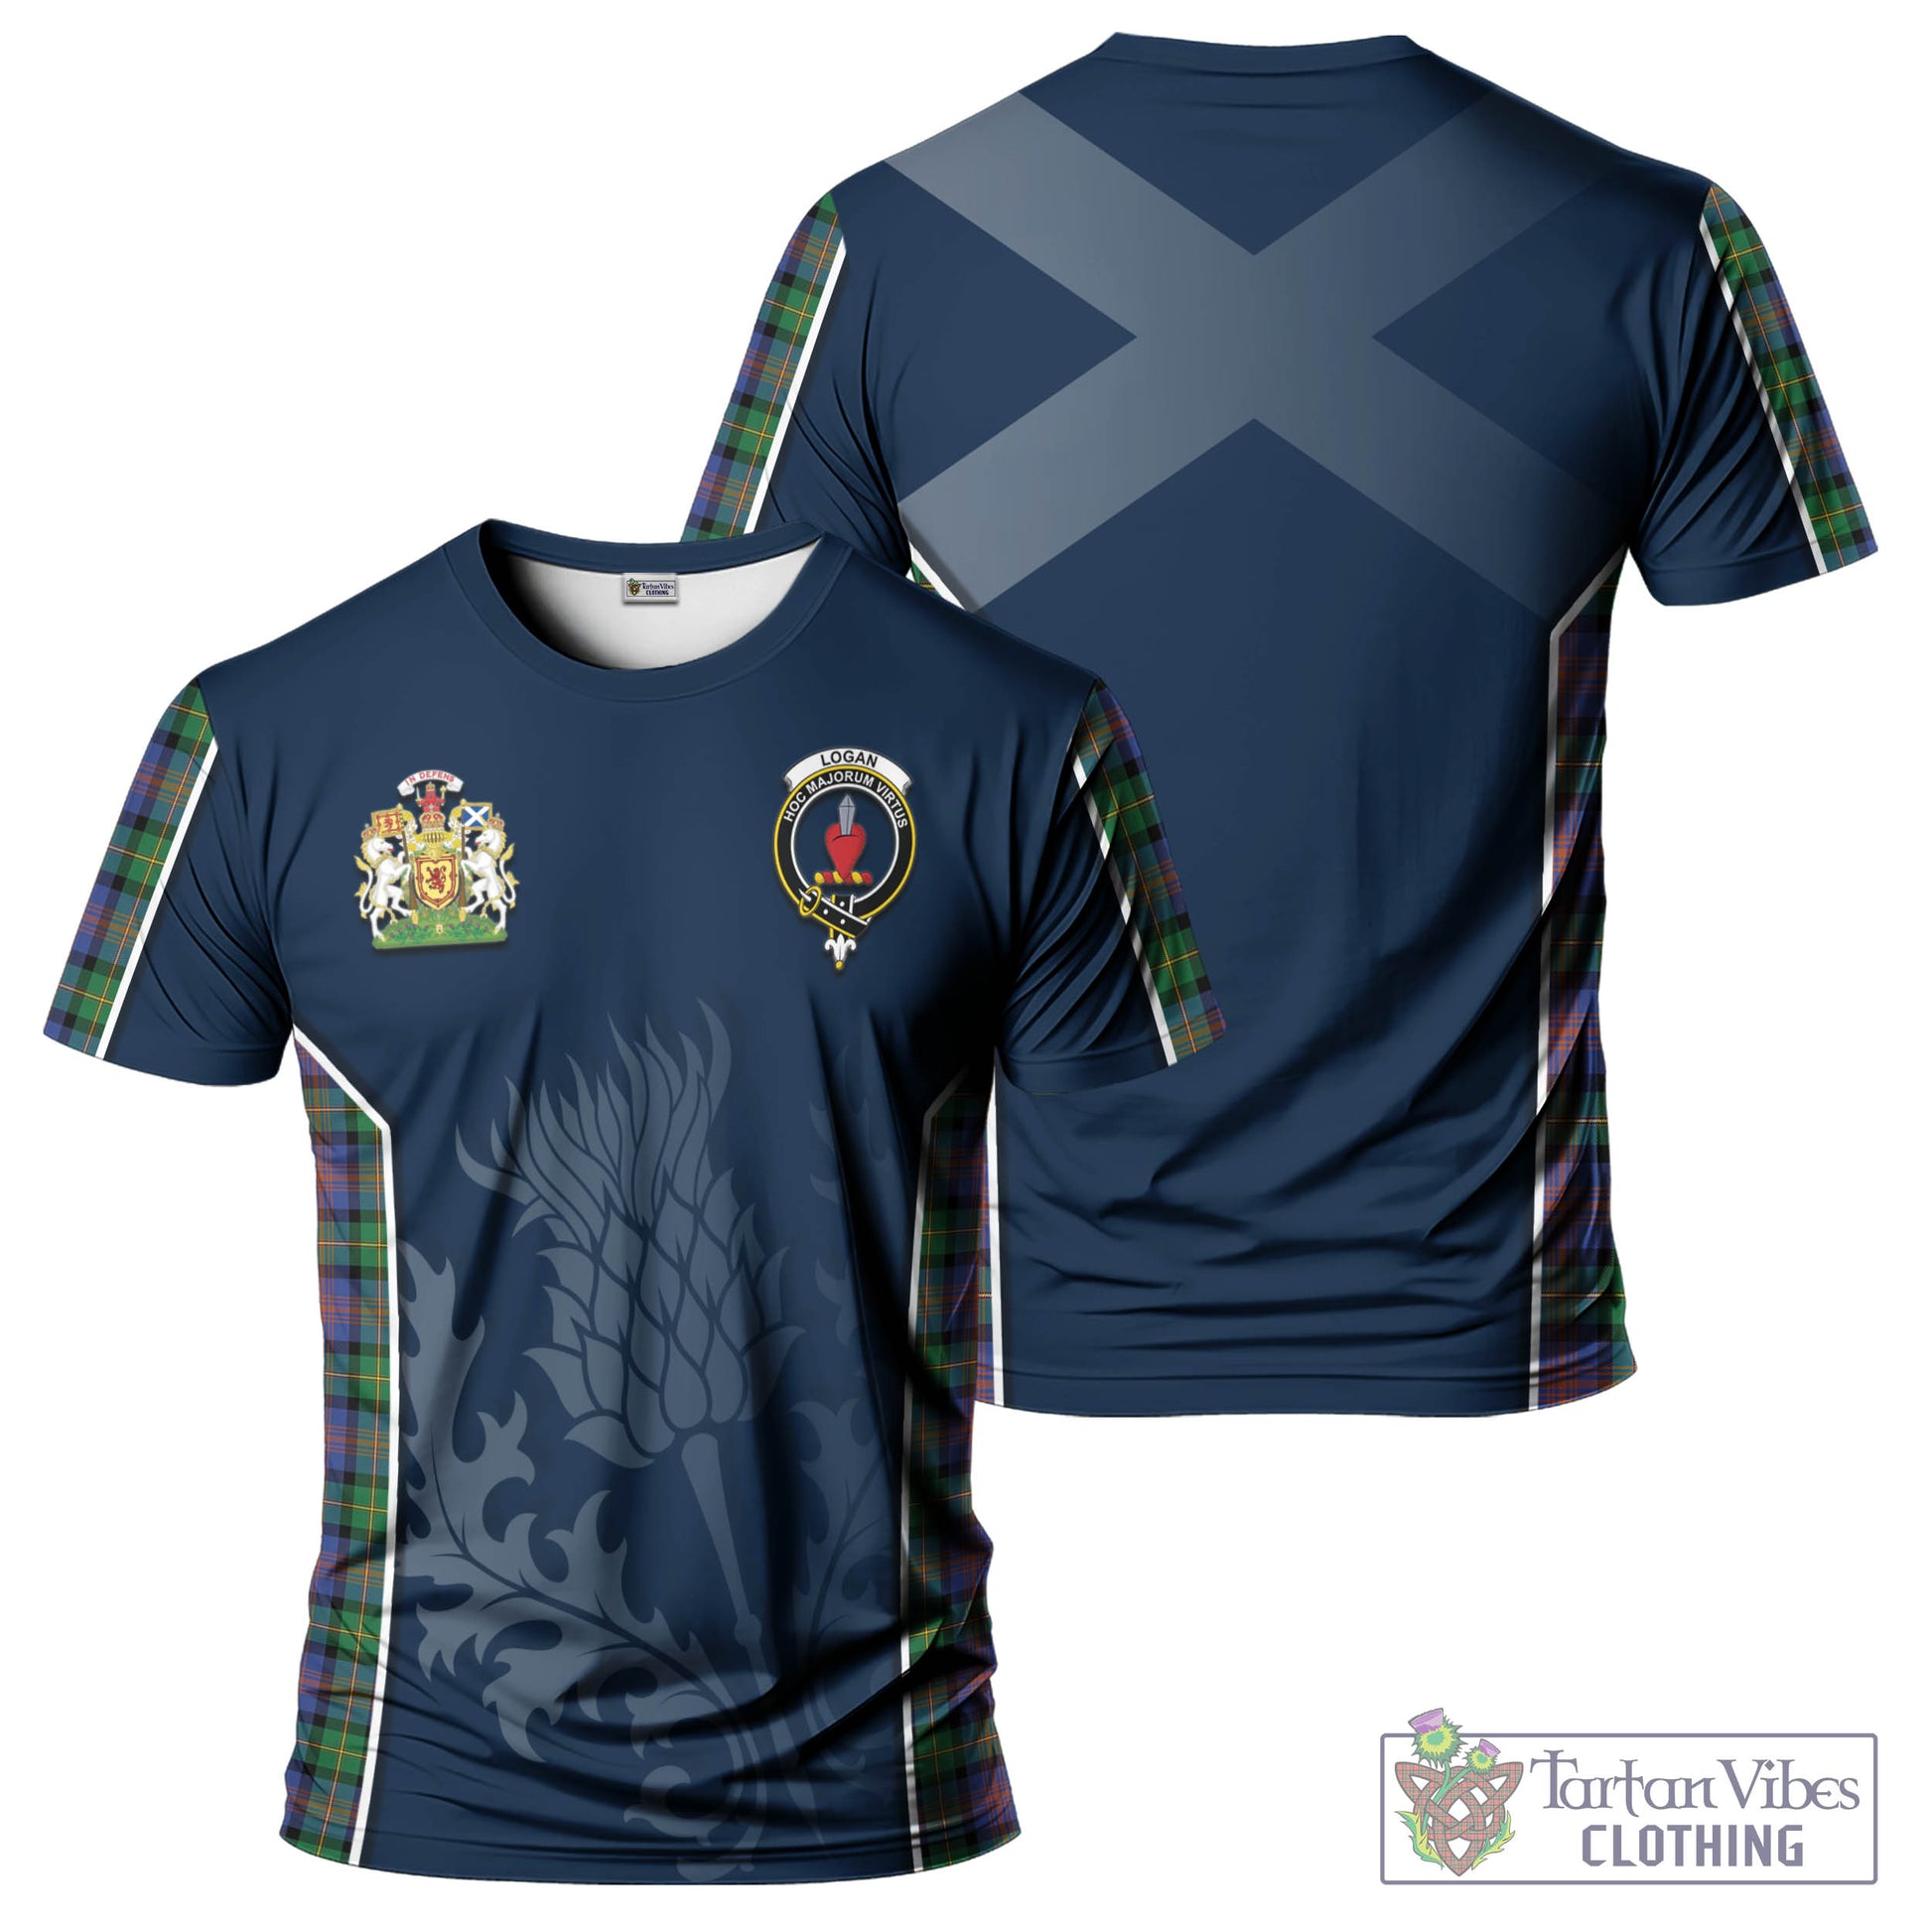 Tartan Vibes Clothing Logan Ancient Tartan T-Shirt with Family Crest and Scottish Thistle Vibes Sport Style